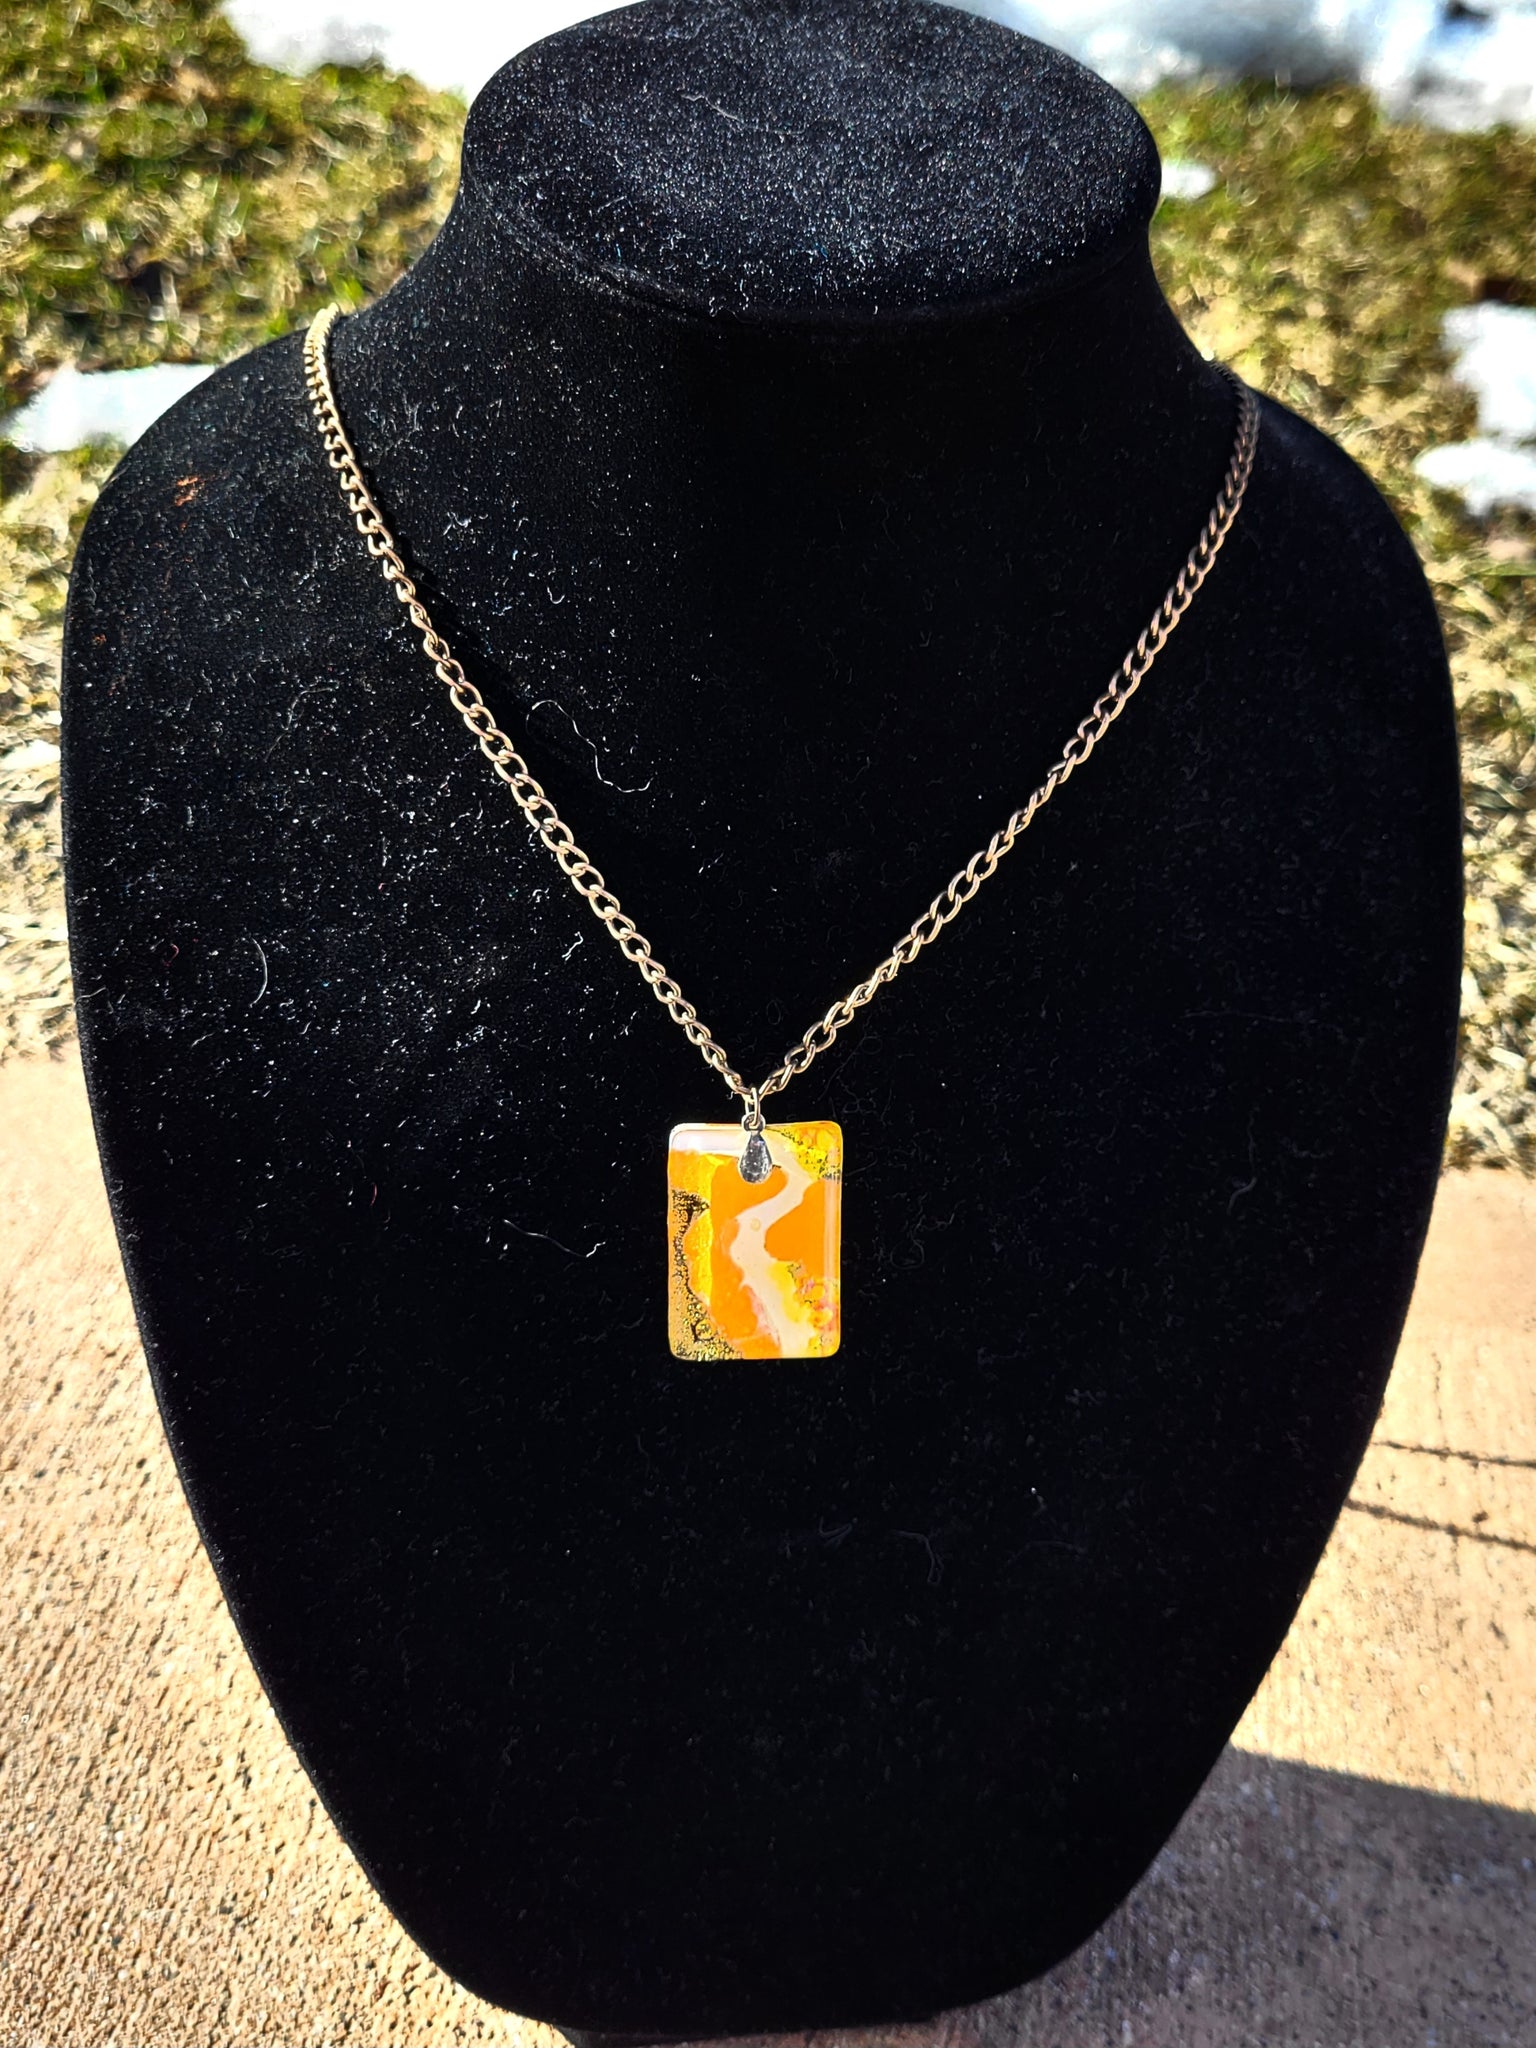 Recycled Orange Square Glass Necklace by Nikkie Howard